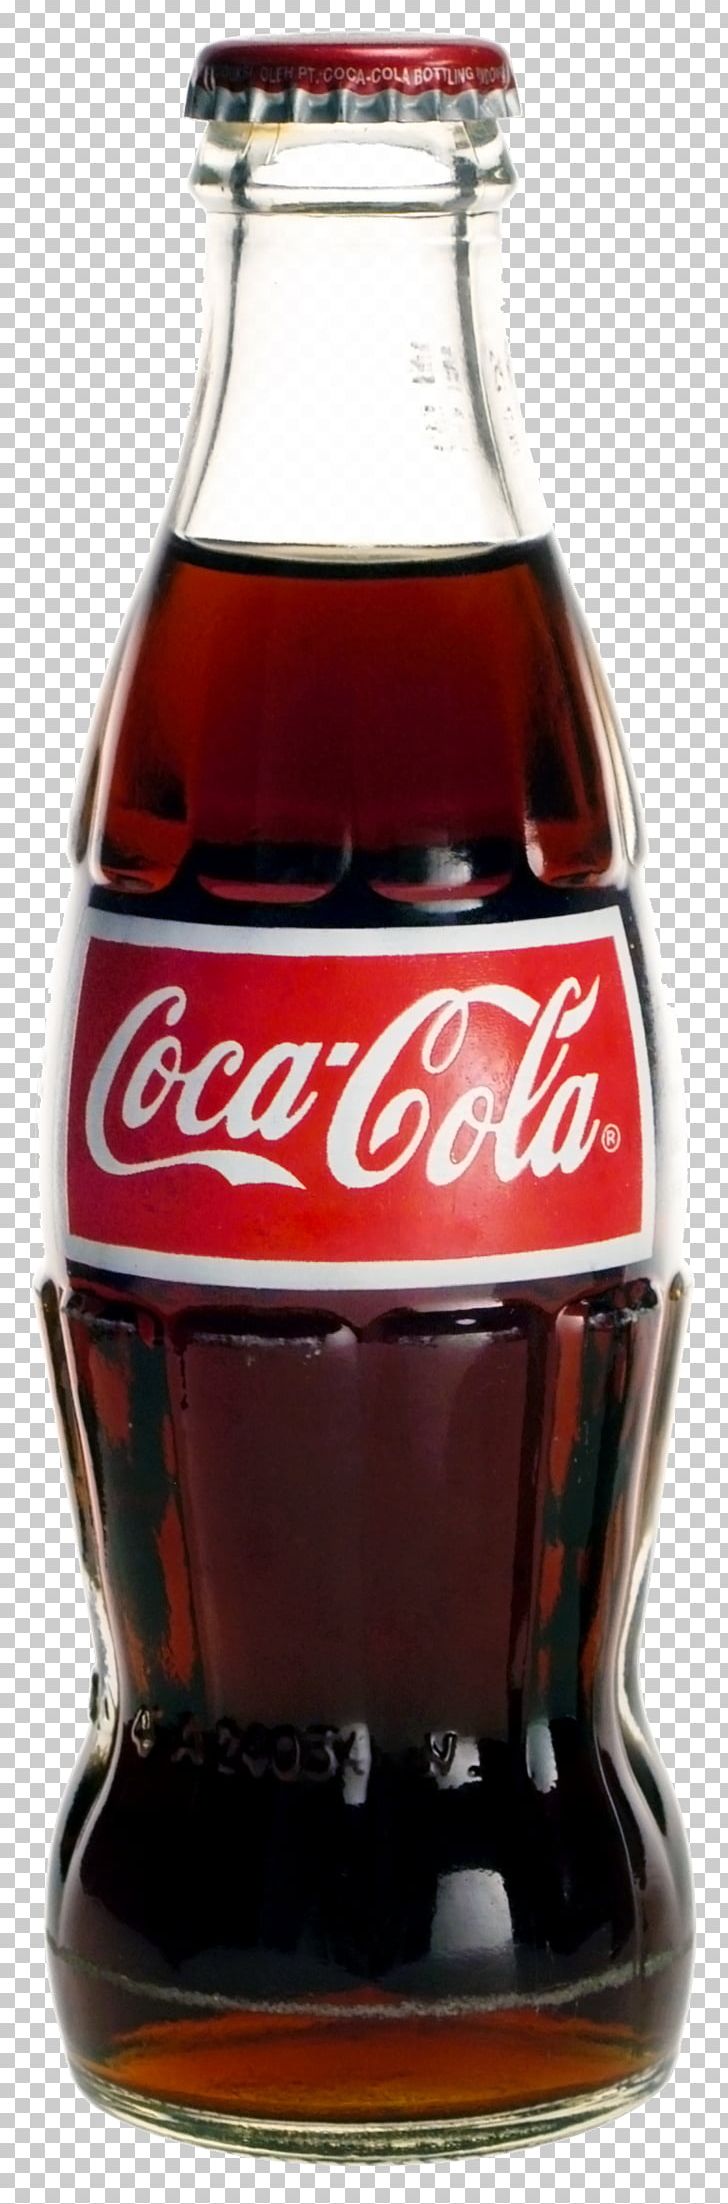 The Coca-Cola Company Fizzy Drinks Bottle PNG, Clipart, Alcoholic Drink, Beverage Can, Bottling Company, Bouteille De Cocacola, Carbonated Soft Drinks Free PNG Download